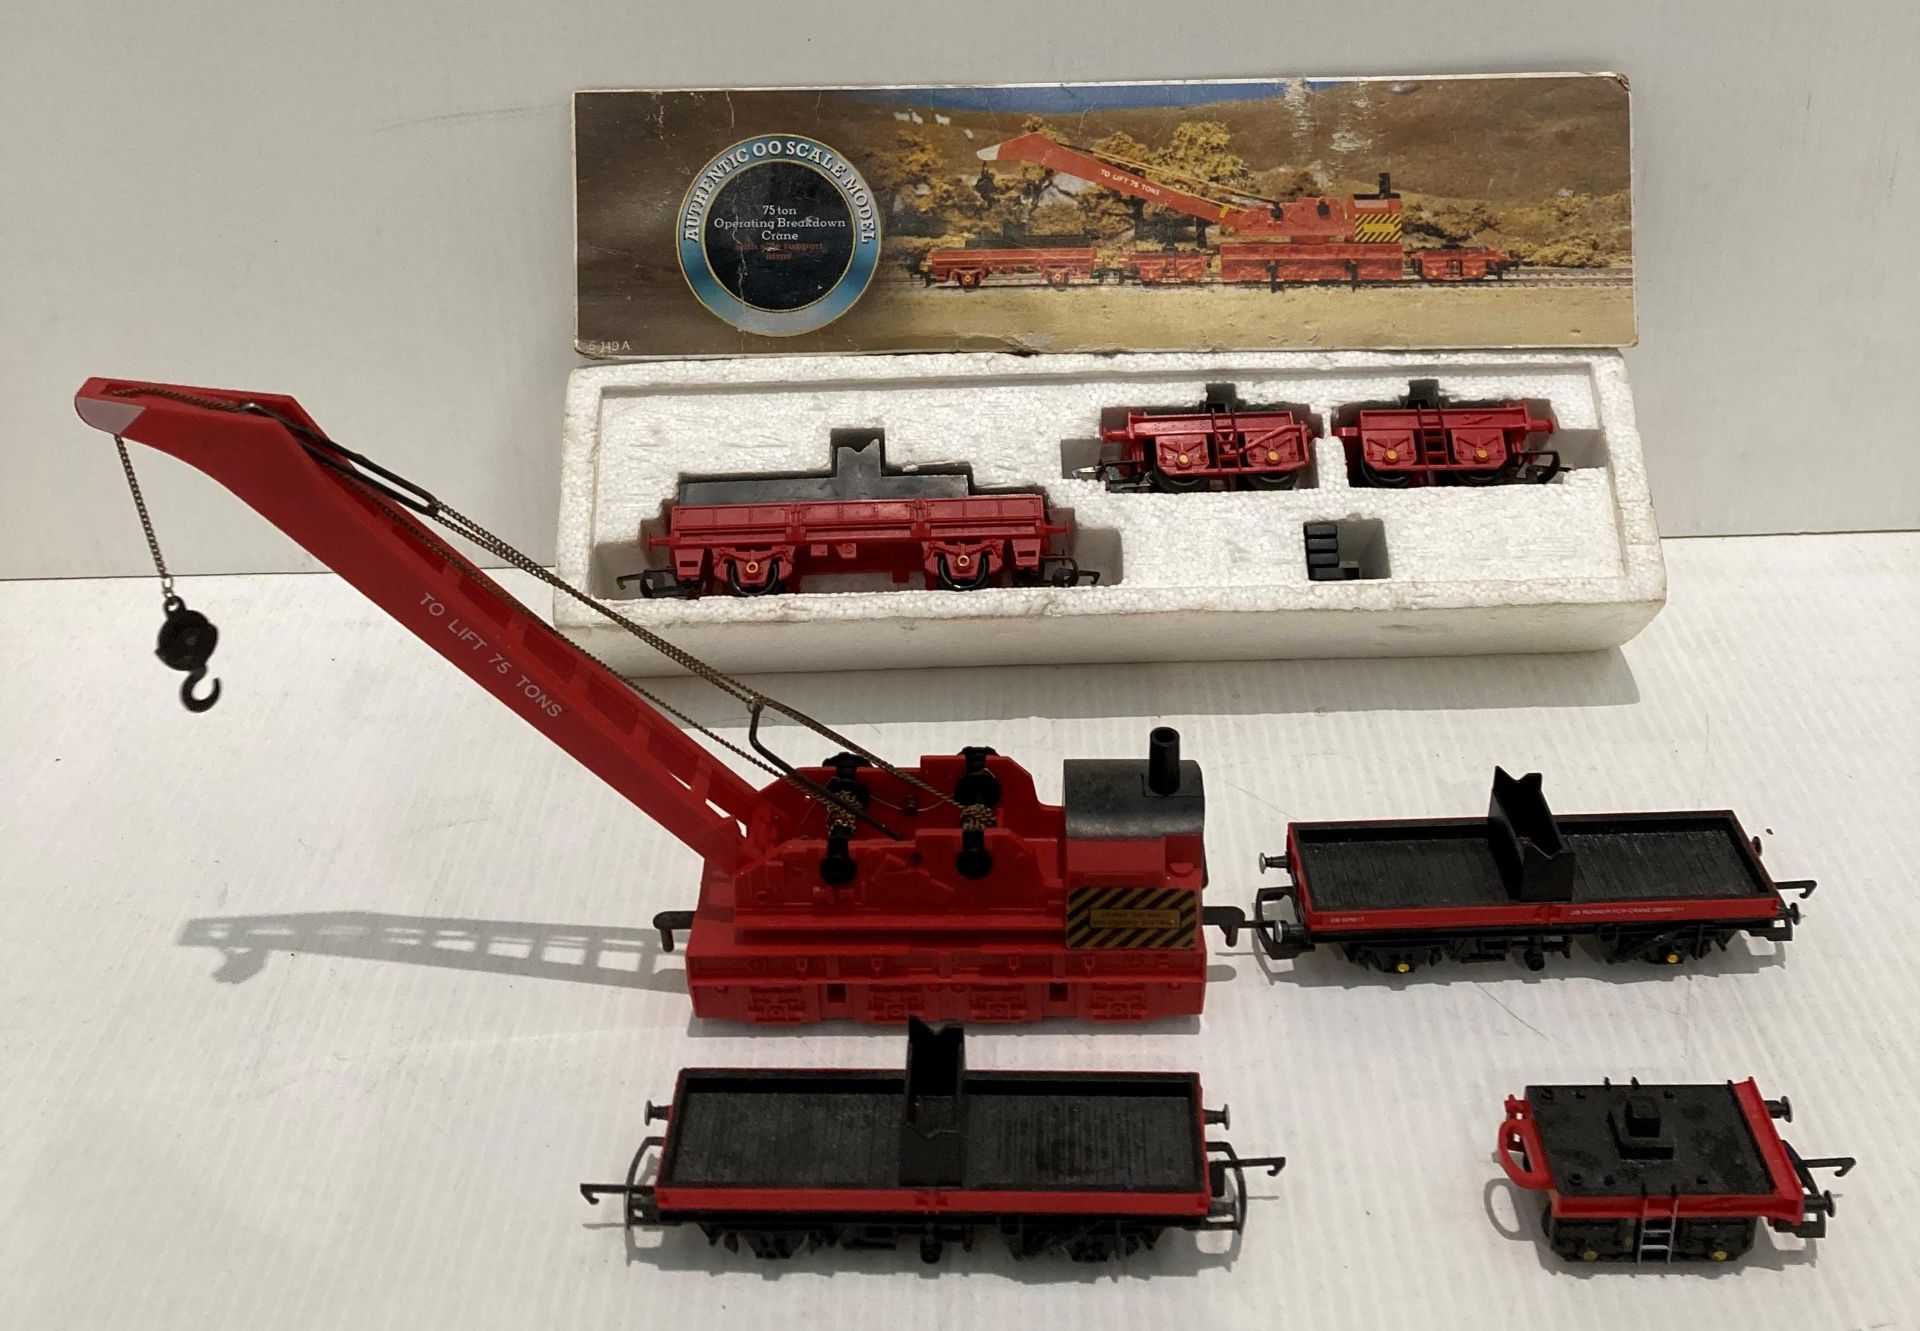 Authentic "OO" scale model of a 75 ton operating breakdown crane with side support arms and three